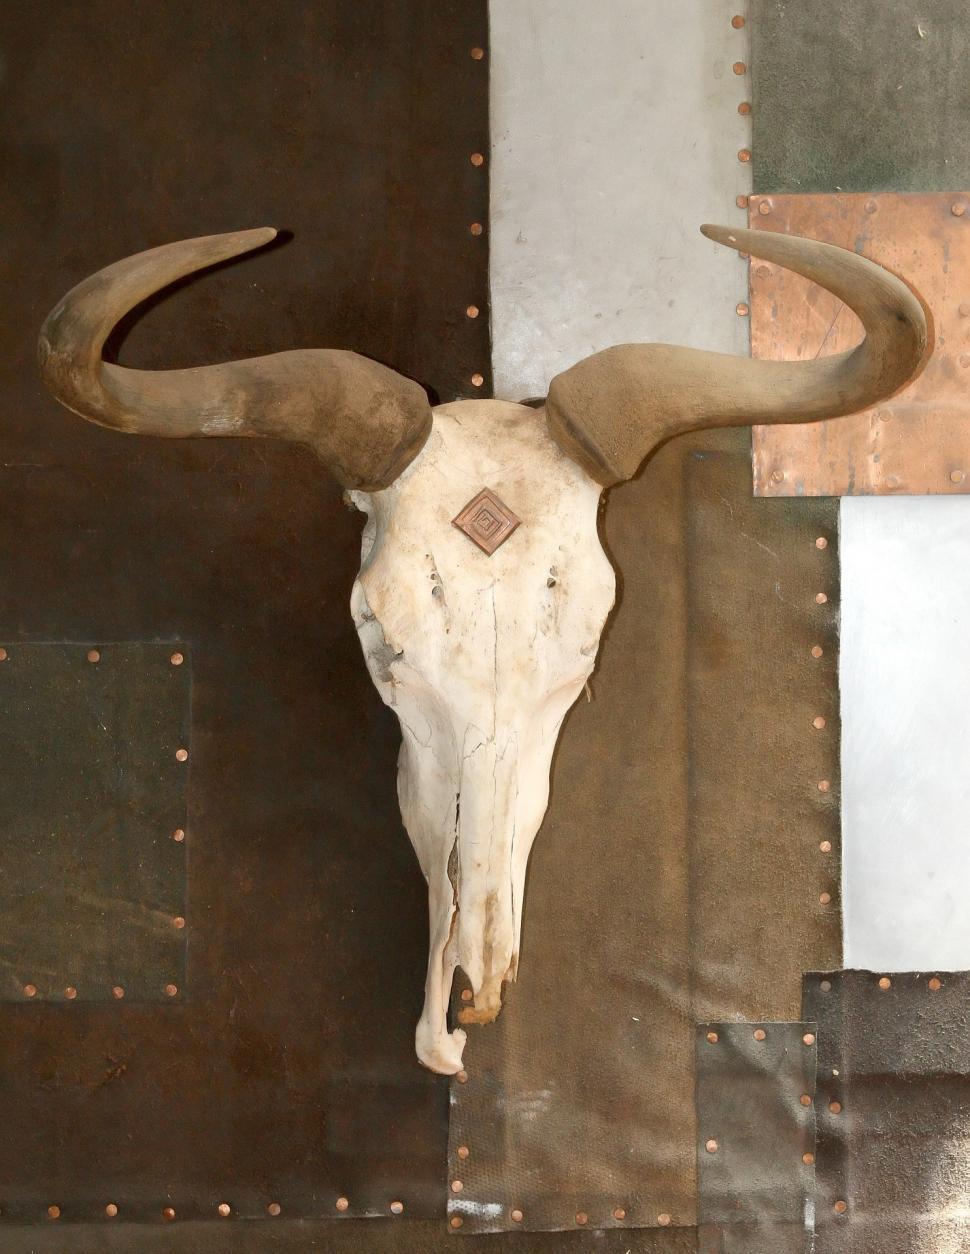 Free Image of Mounted Bull Skull on Wall 